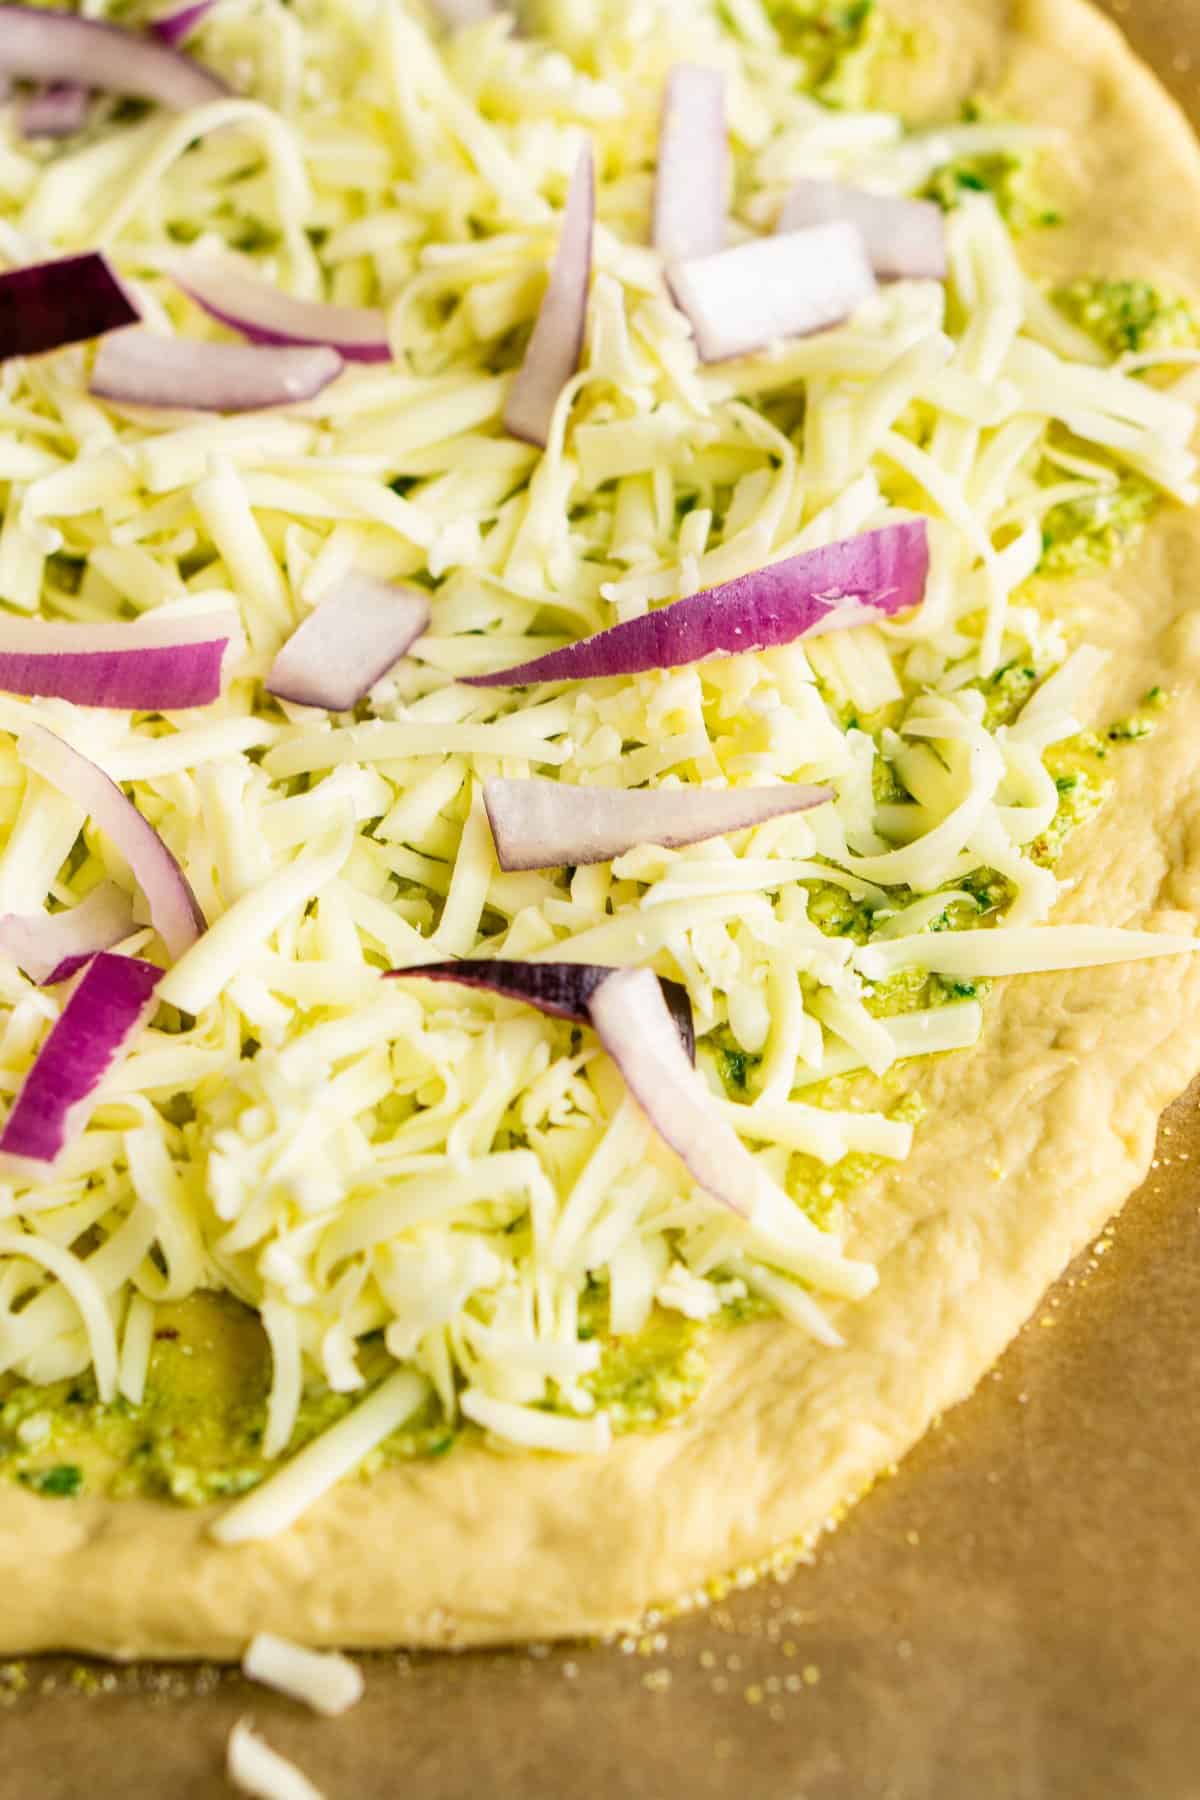 The pizza topped with cheese, pesto and red onions before baking.